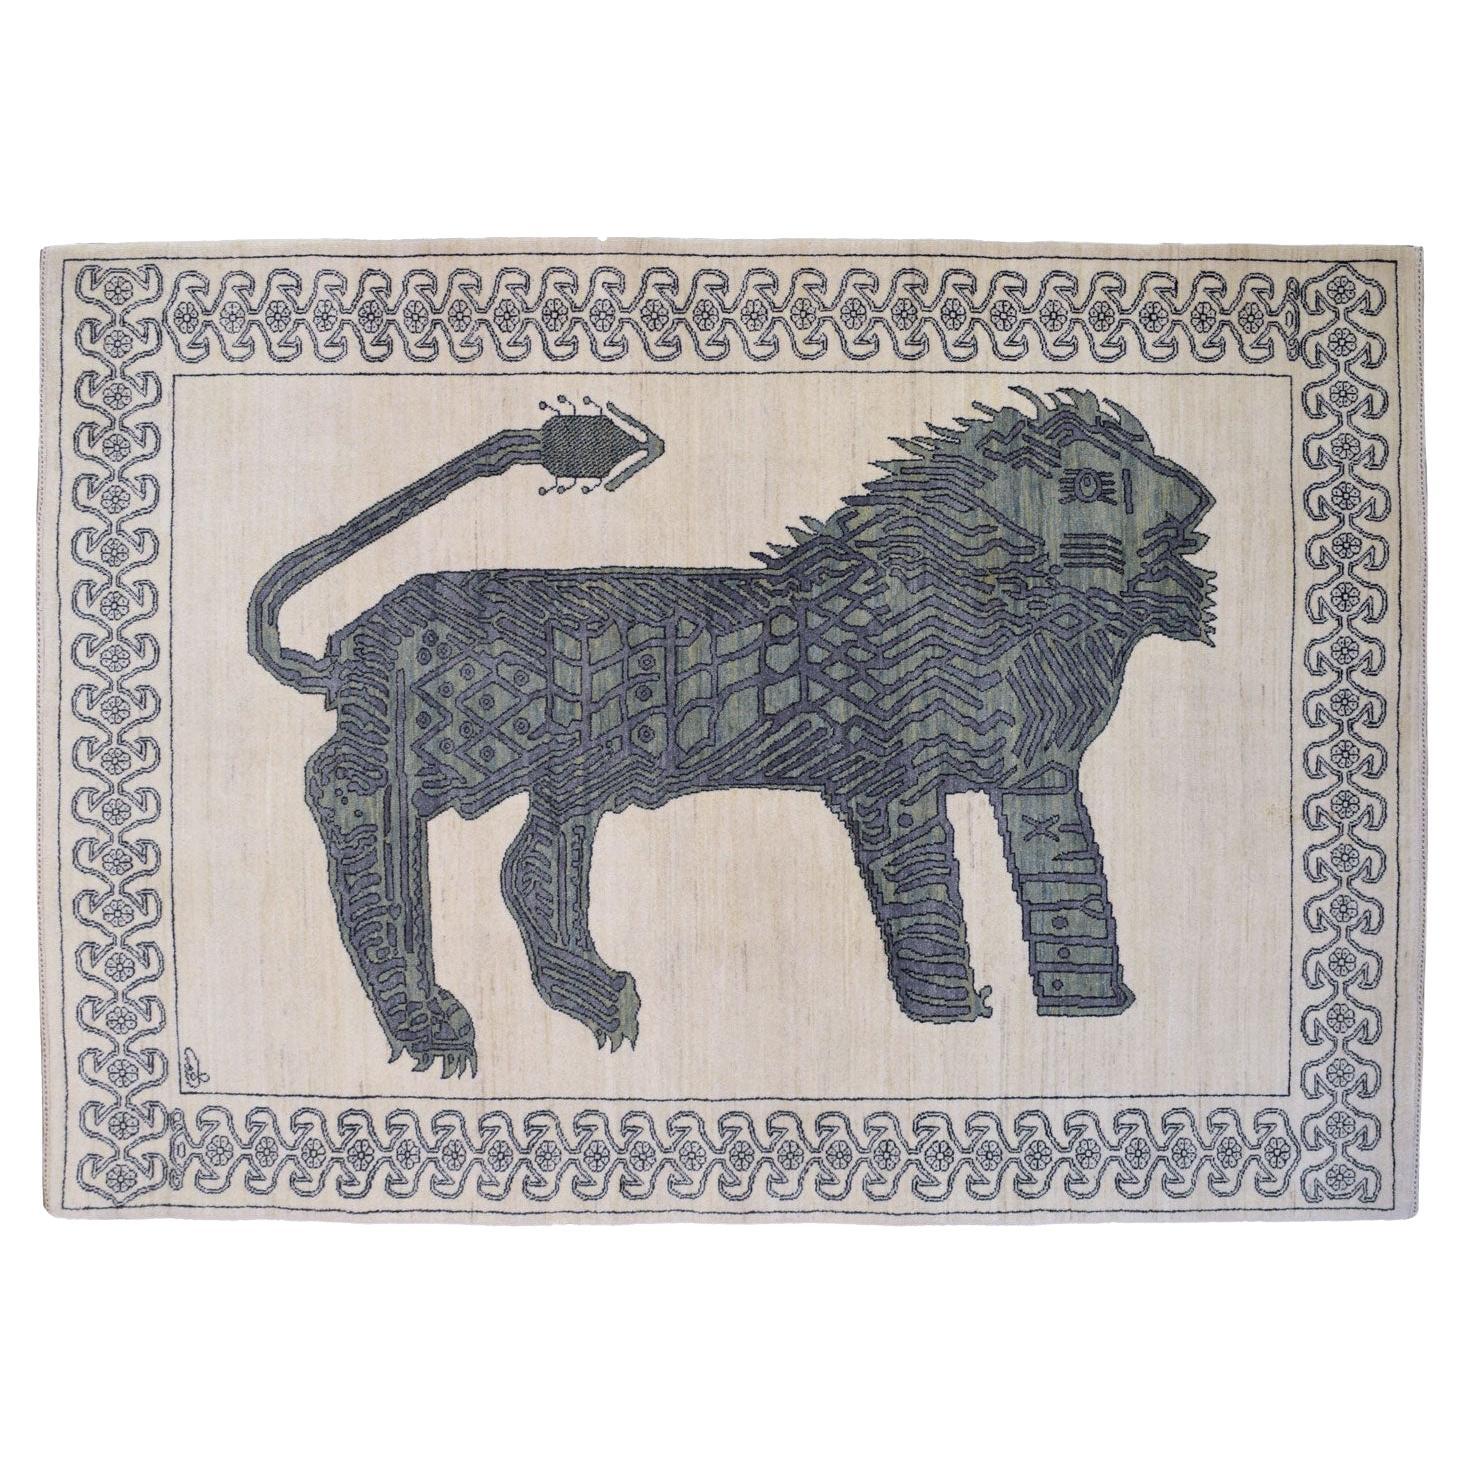 Orley Shabahang "Majesty" Lion Persian Wool Carpet, 5' x 7' For Sale